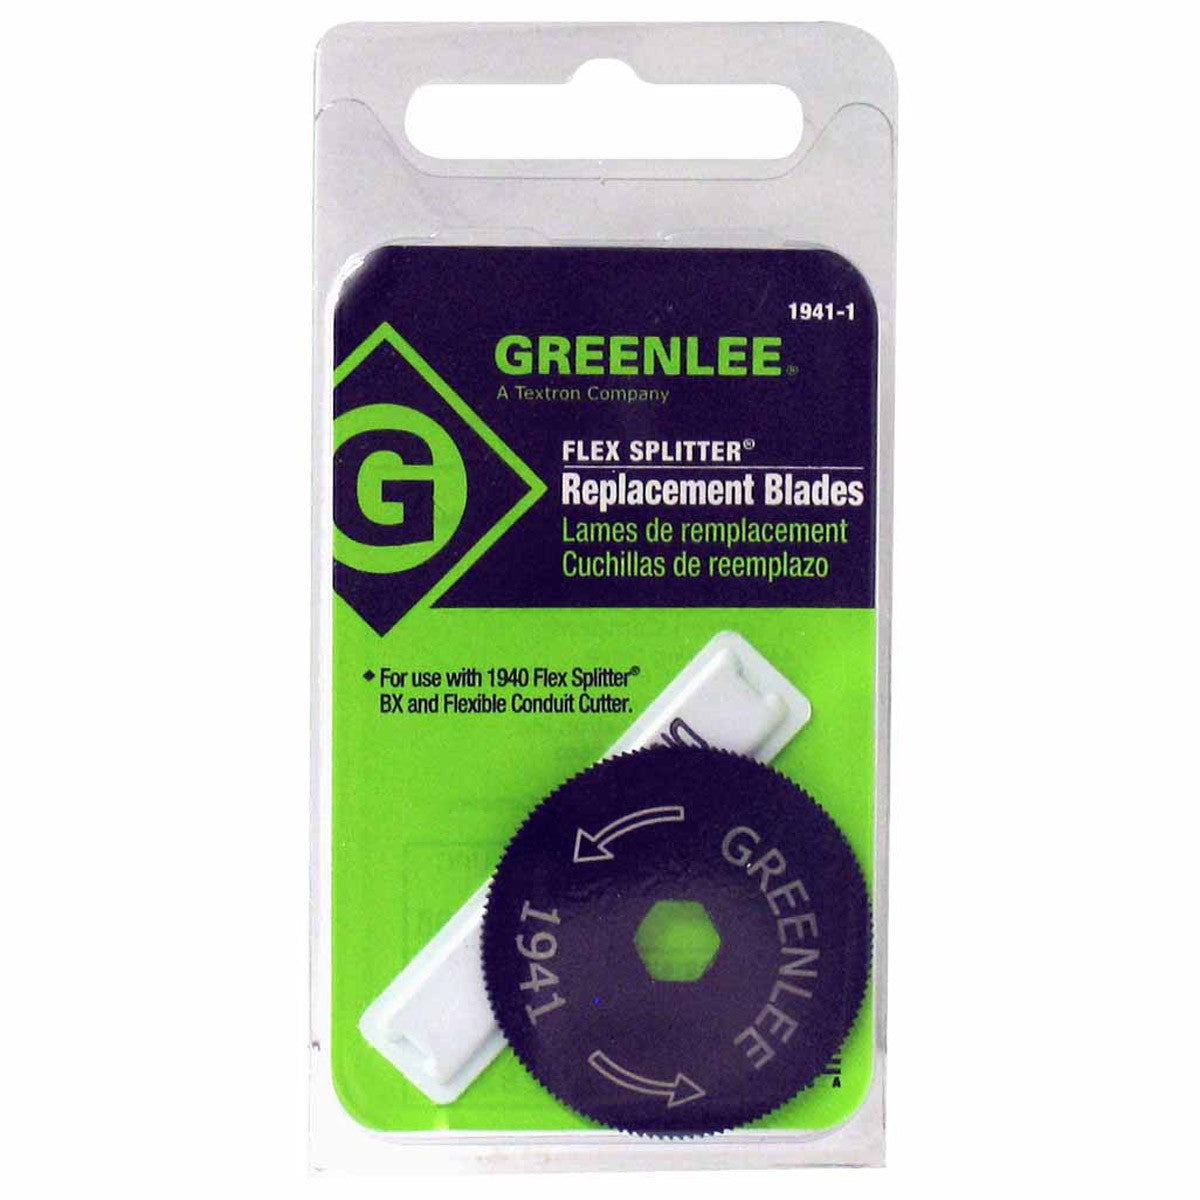 Greenlee 1941-1 Replacement Blade for 1940